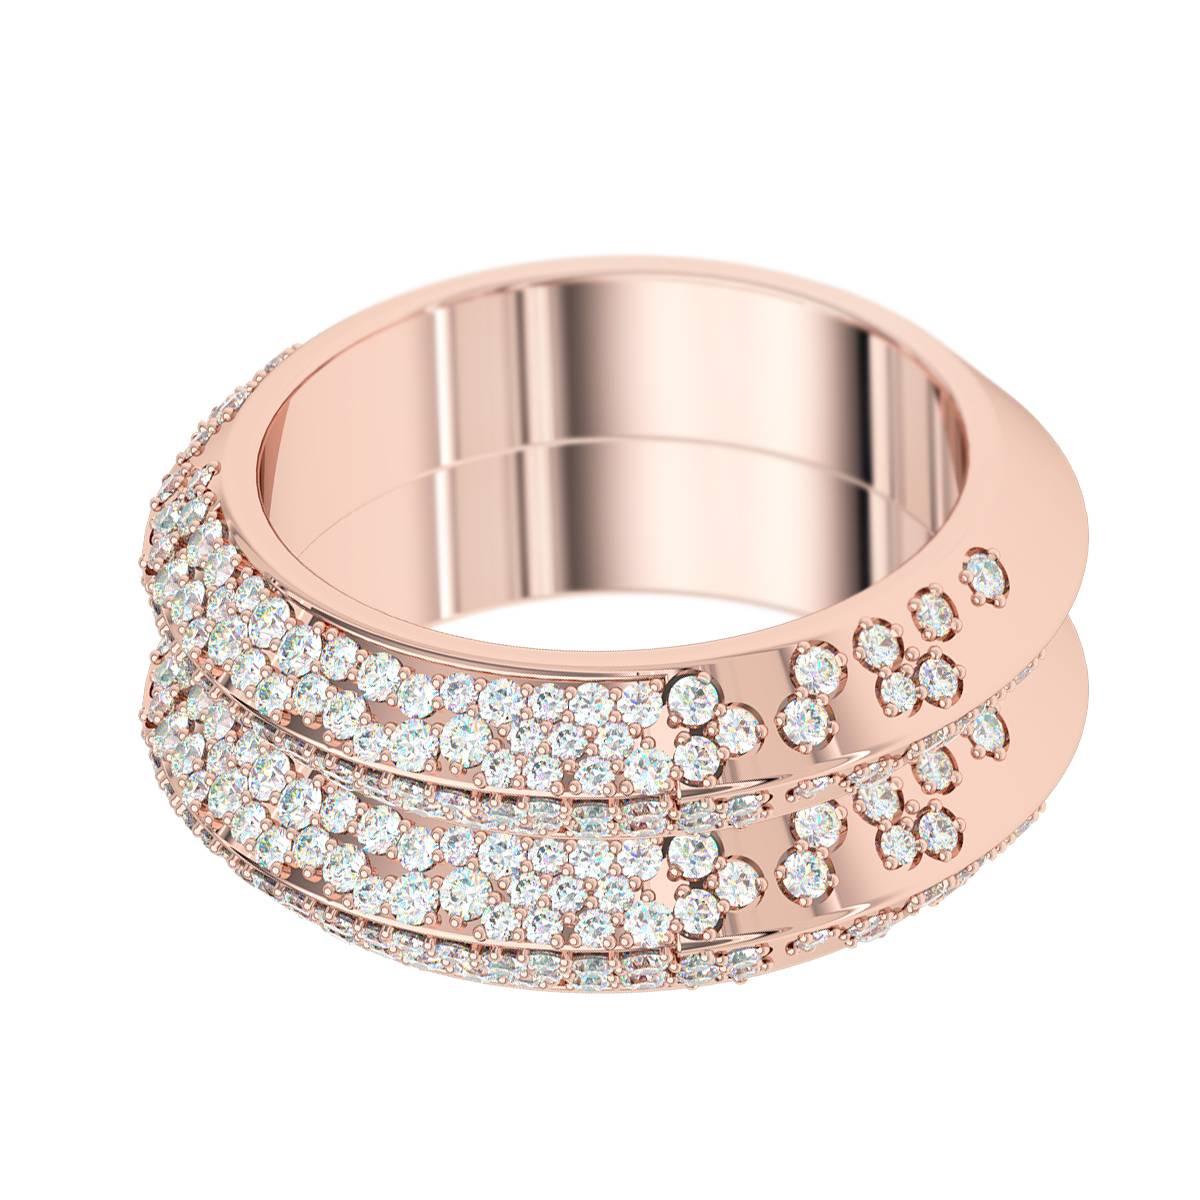 This elegant diamond pave eternity band ring is handcrafted in Sydney in 18 karat rose gold, and set with 1.6 carats of top quality diamonds. The knife edge design of the double band is contemporary and timeless. This beautiful ring would make a